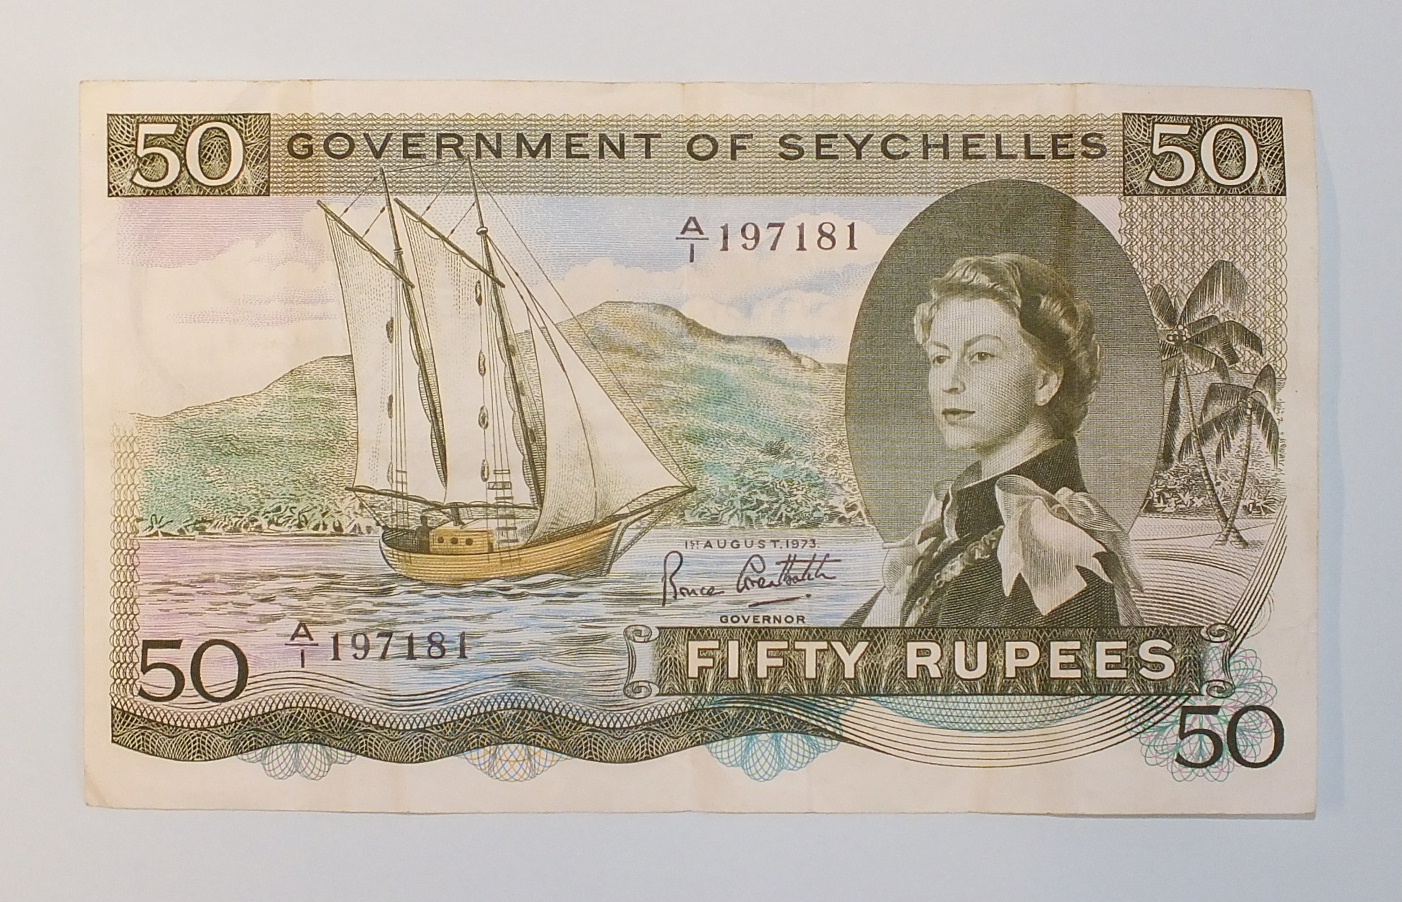 A Government of Seychelles 50 rupees bank note, A/1 197181, dated 1st August 1973, centre crease.